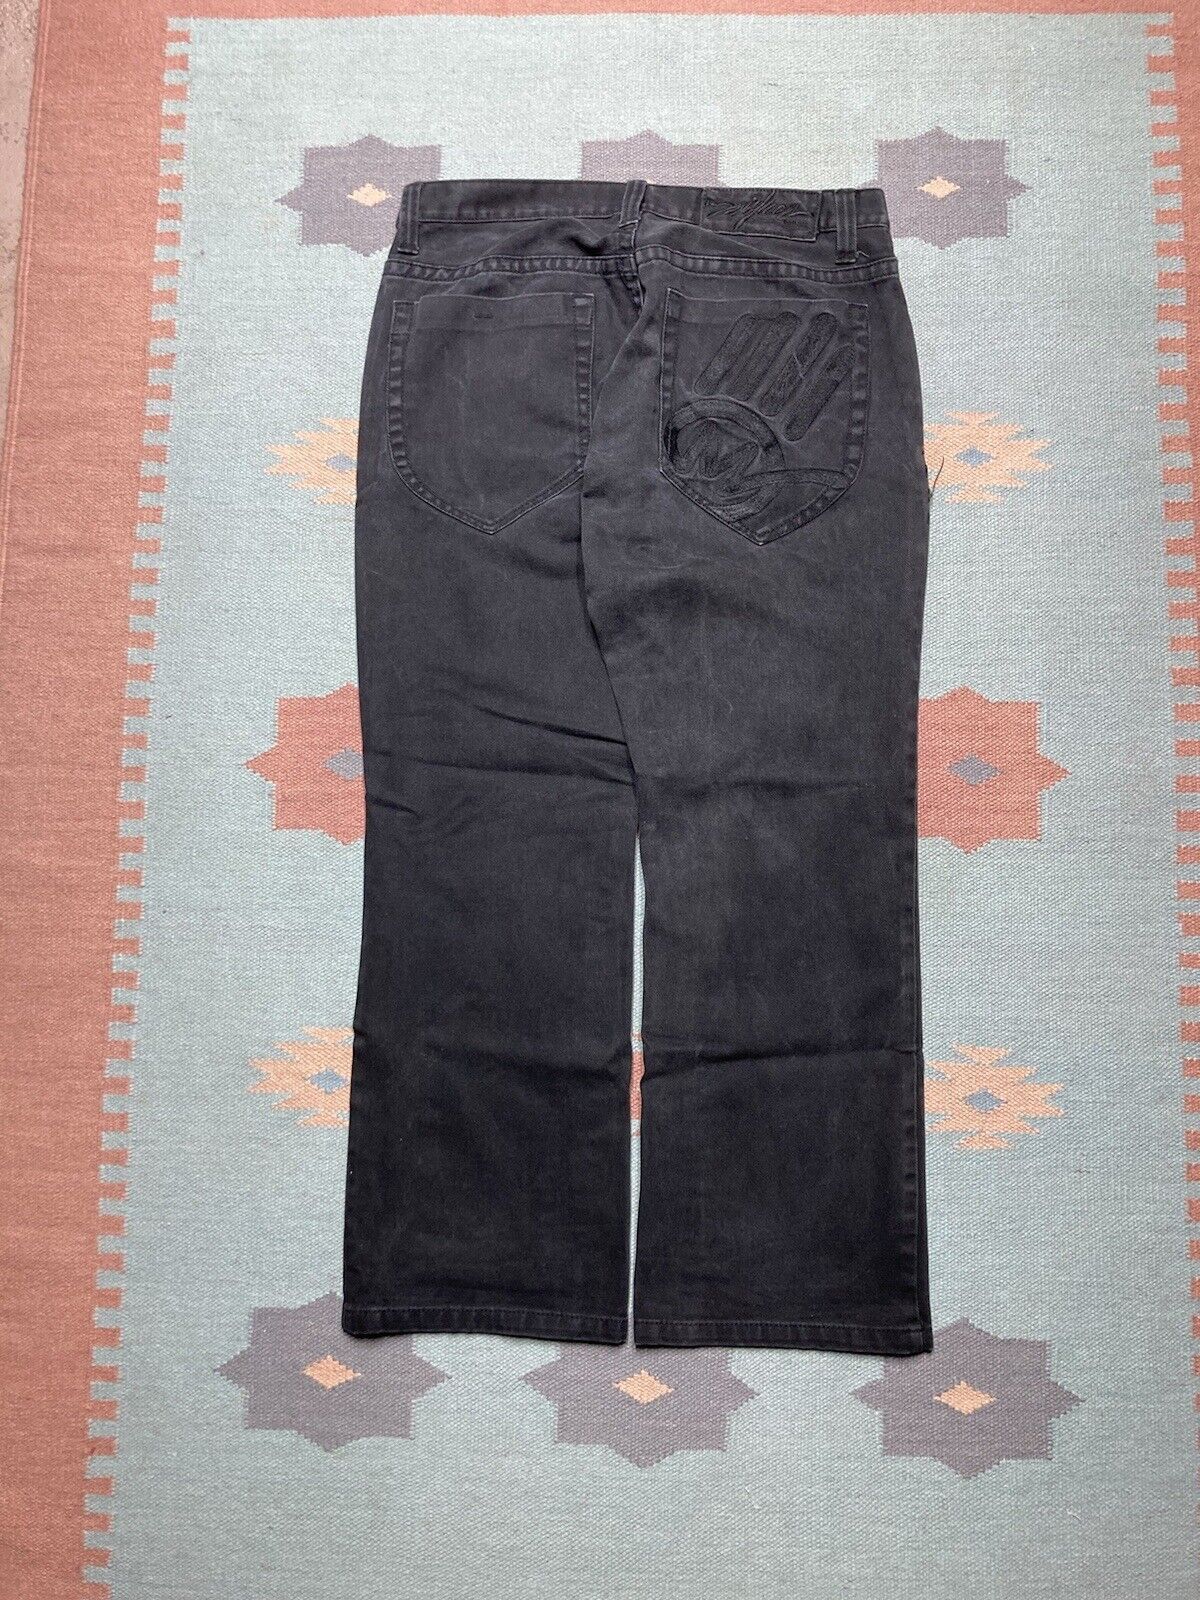 Vintage y2k baggy jeans miskeen embroidered goth grunge wide 38x31 Size US 38 / EU 54 - 1 Preview